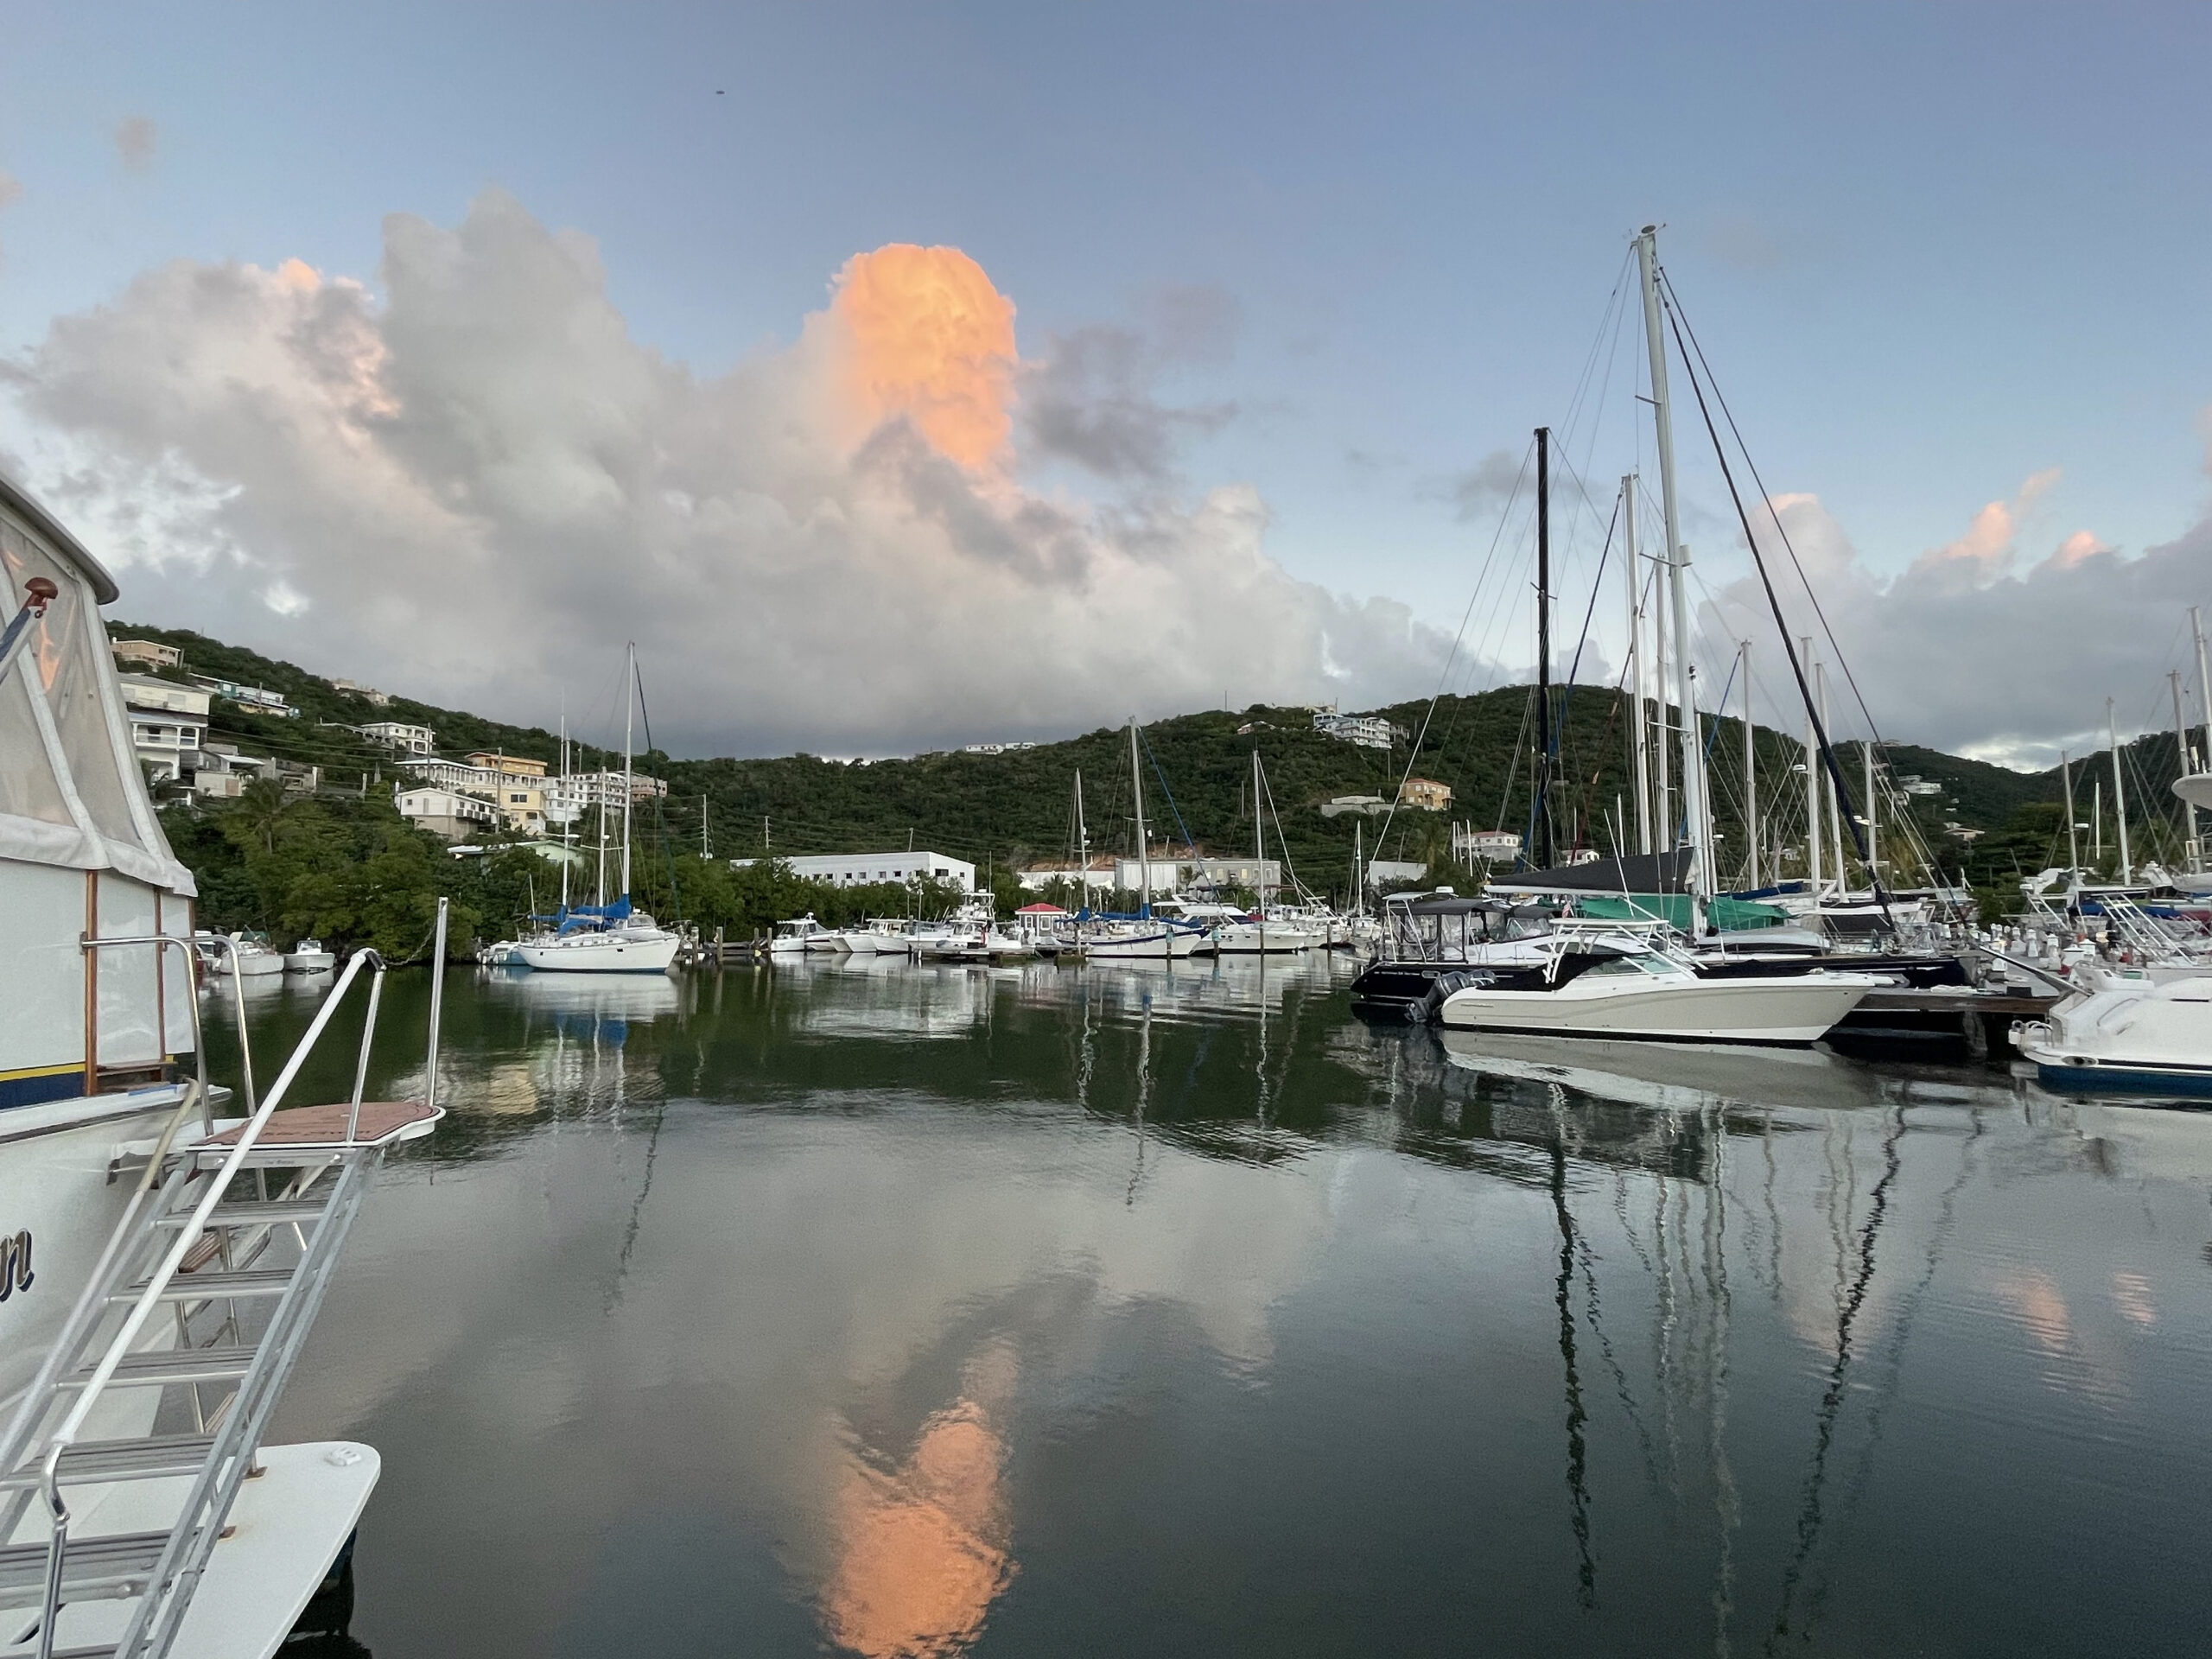 The Oasis Cove Marina on St. Thomas, where a woman and an infant were pulled from the water Tuesday night. (VIPD photo)